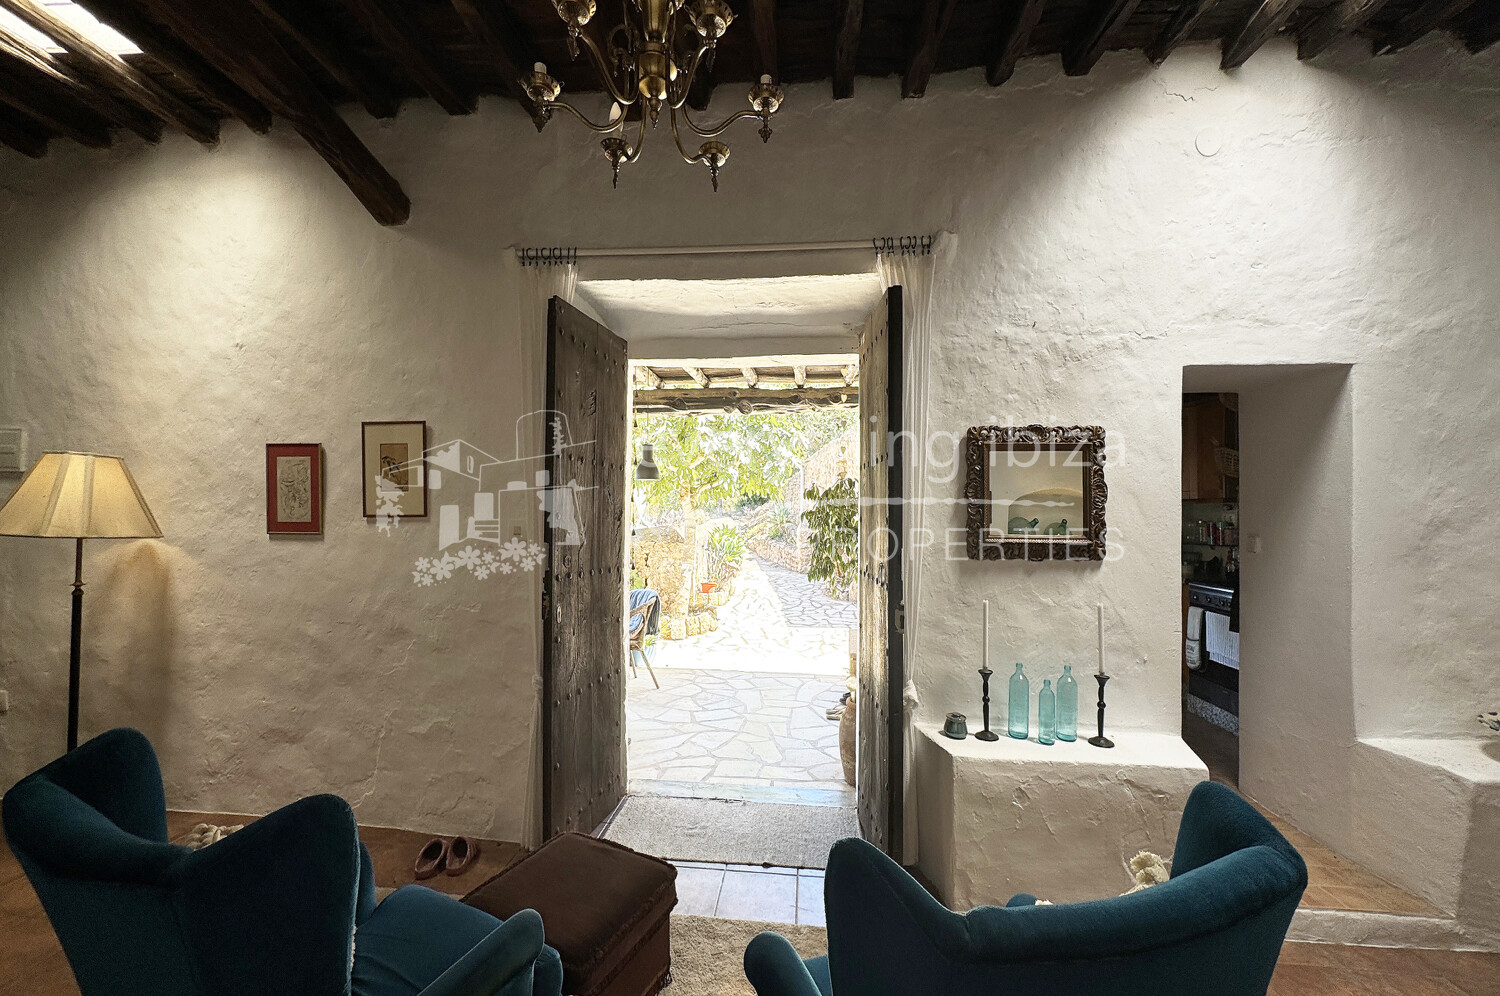 Beautiful Traditional Finca with 2 Separate Annexes Set in a Peaceful Rural Area, ref. 1715, for sale in Ibiza by everything ibiza Properties